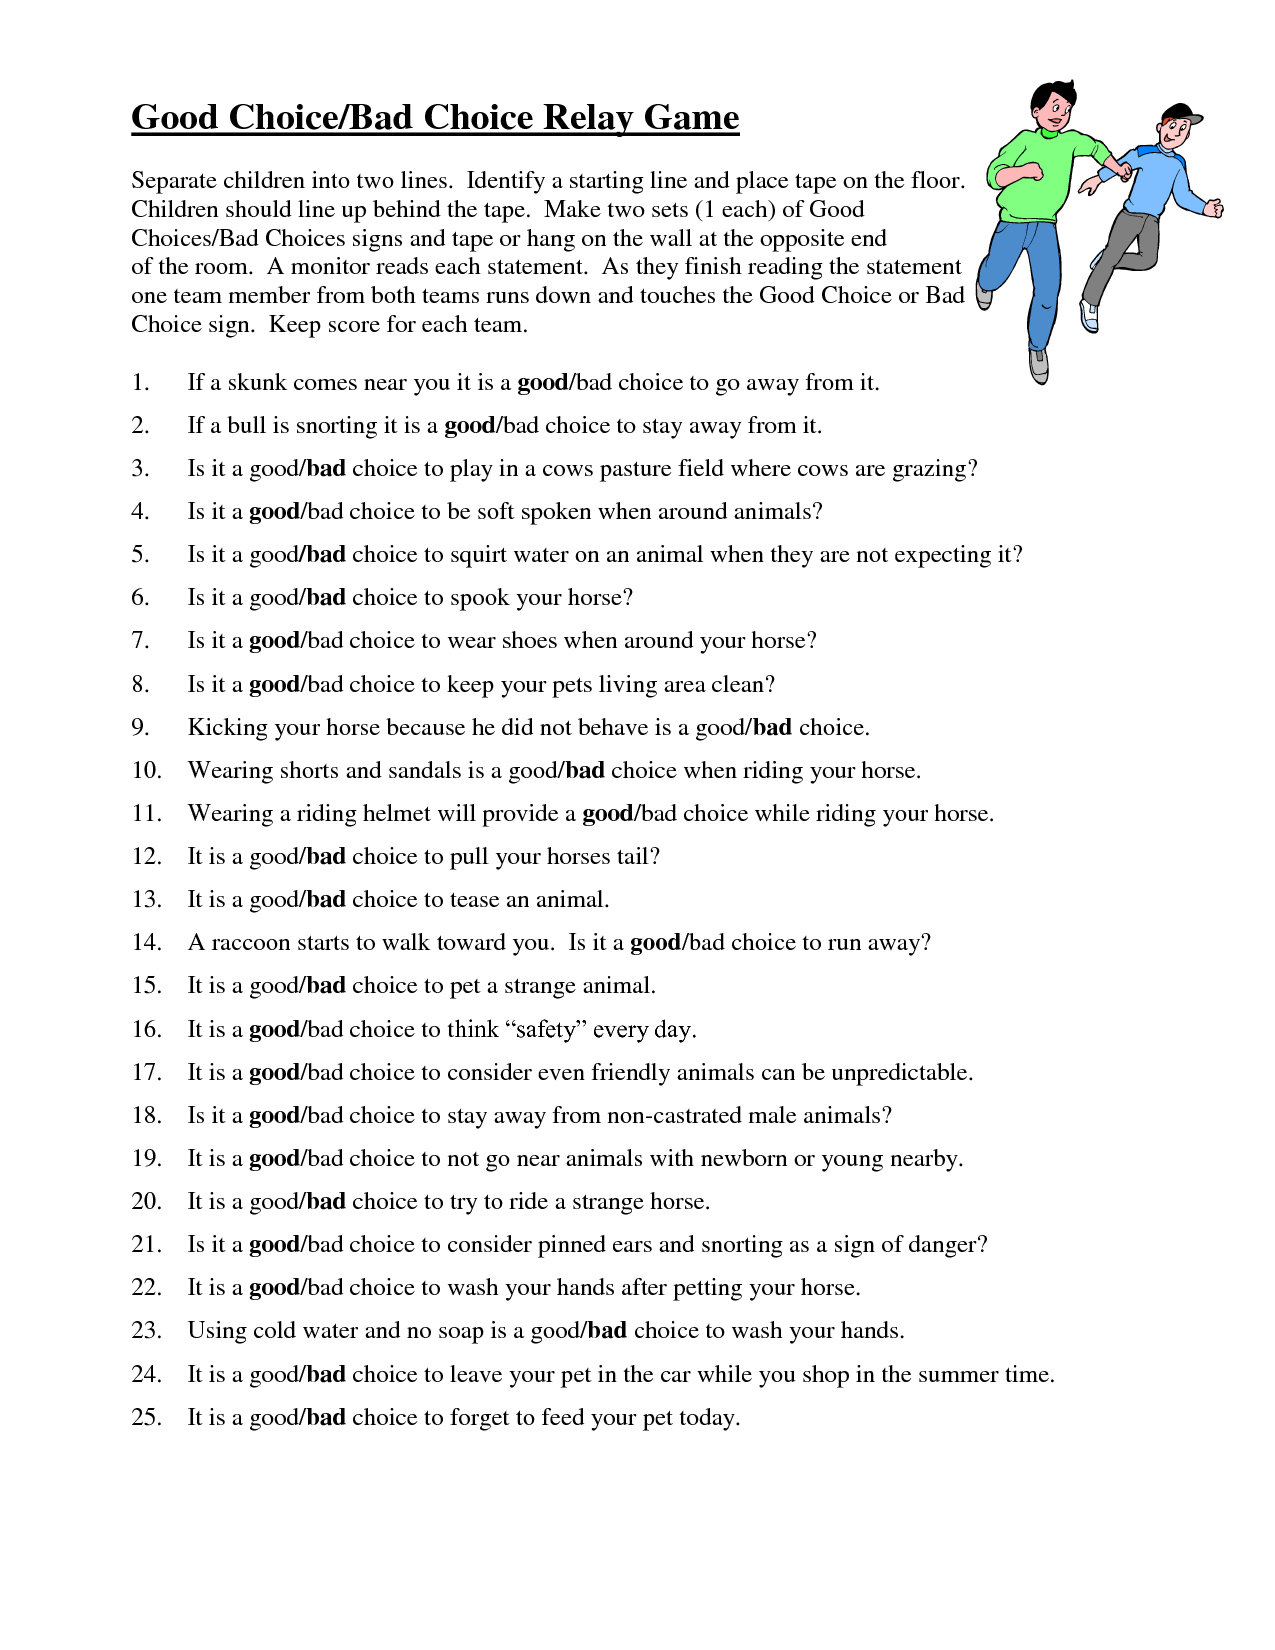 11-best-images-of-good-and-bad-choices-worksheet-making-friends